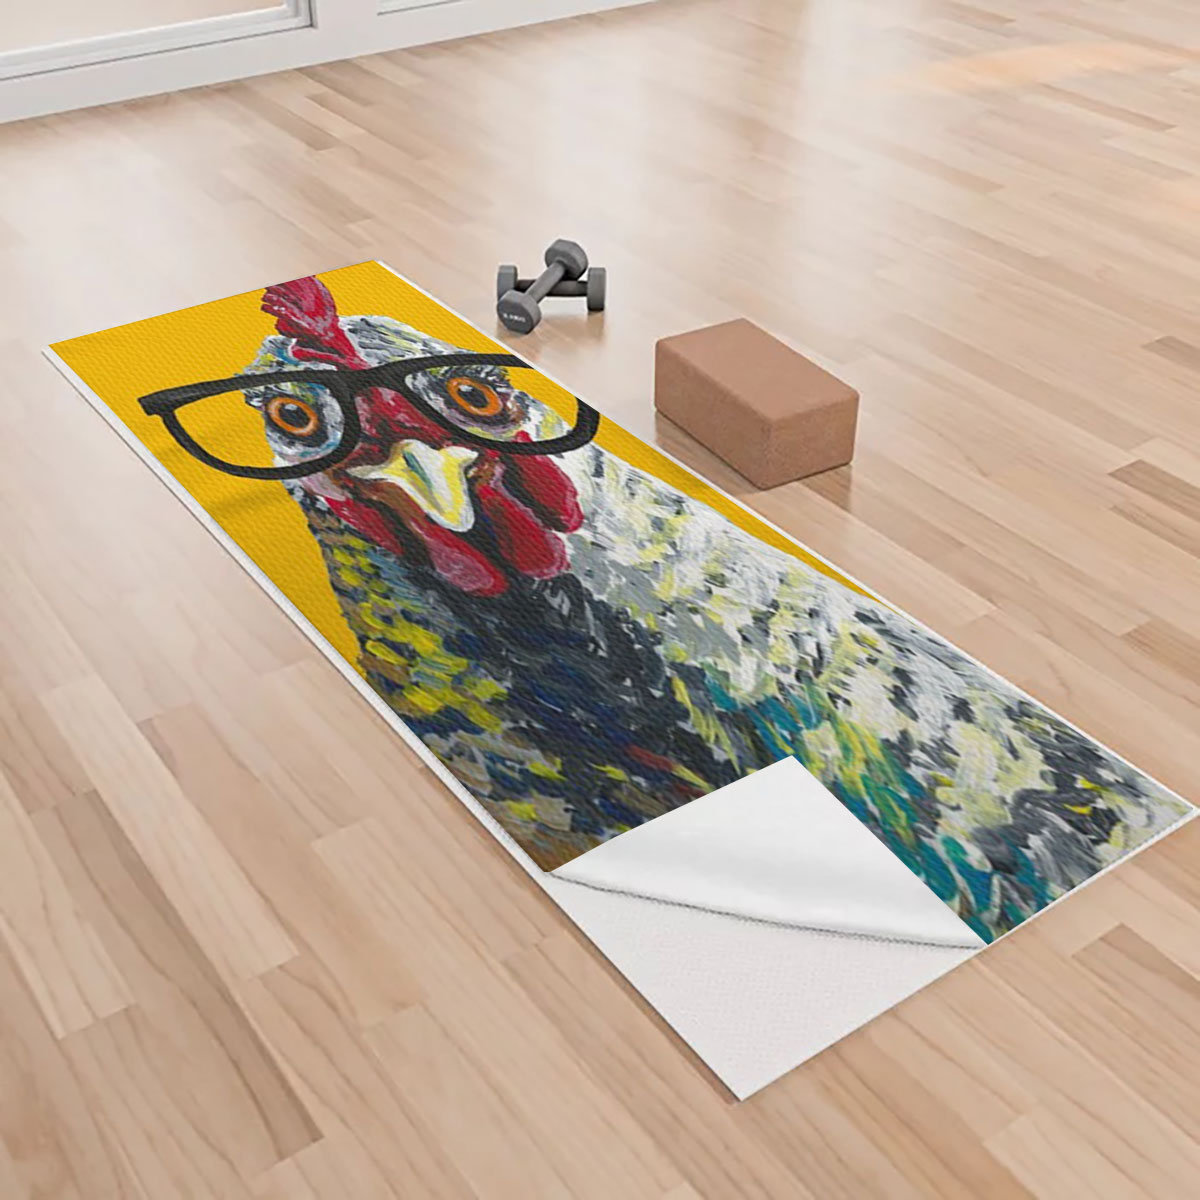 Chicken With Glasses Yoga Towels